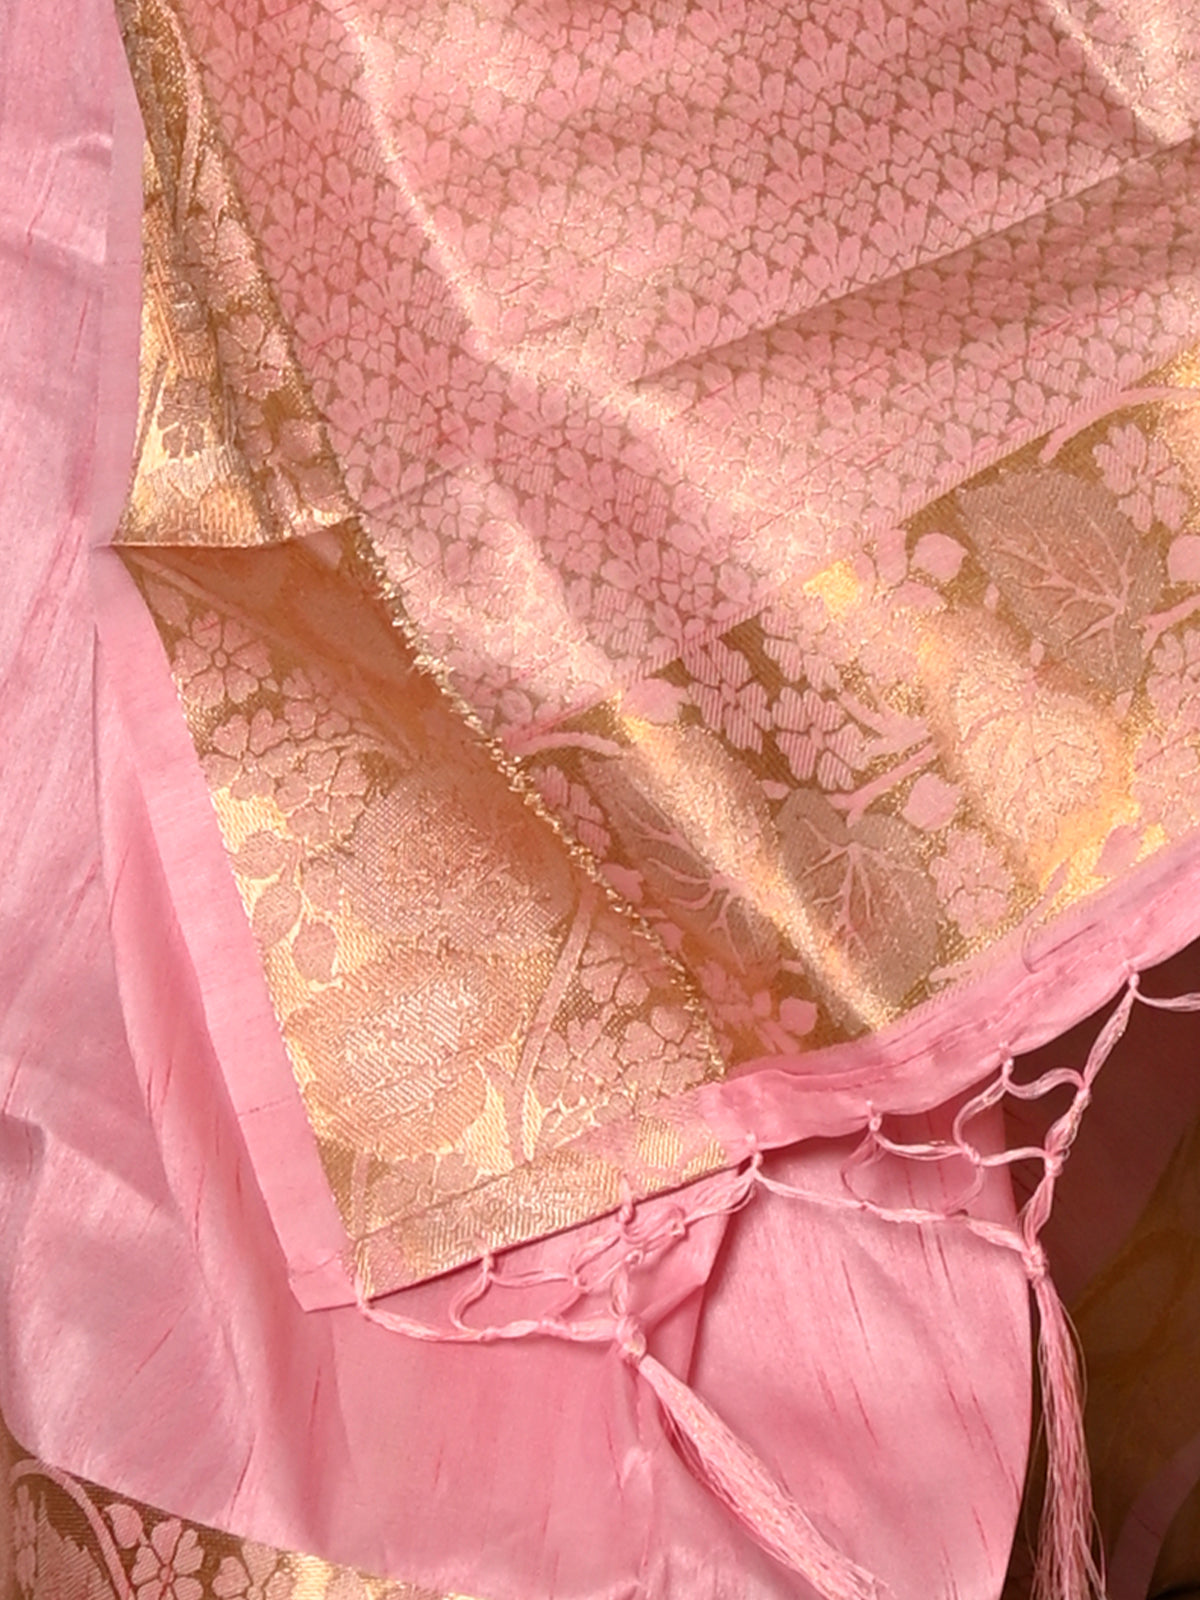 Festive Pink Silk Blend Woven Saree With Unstitched Blouse